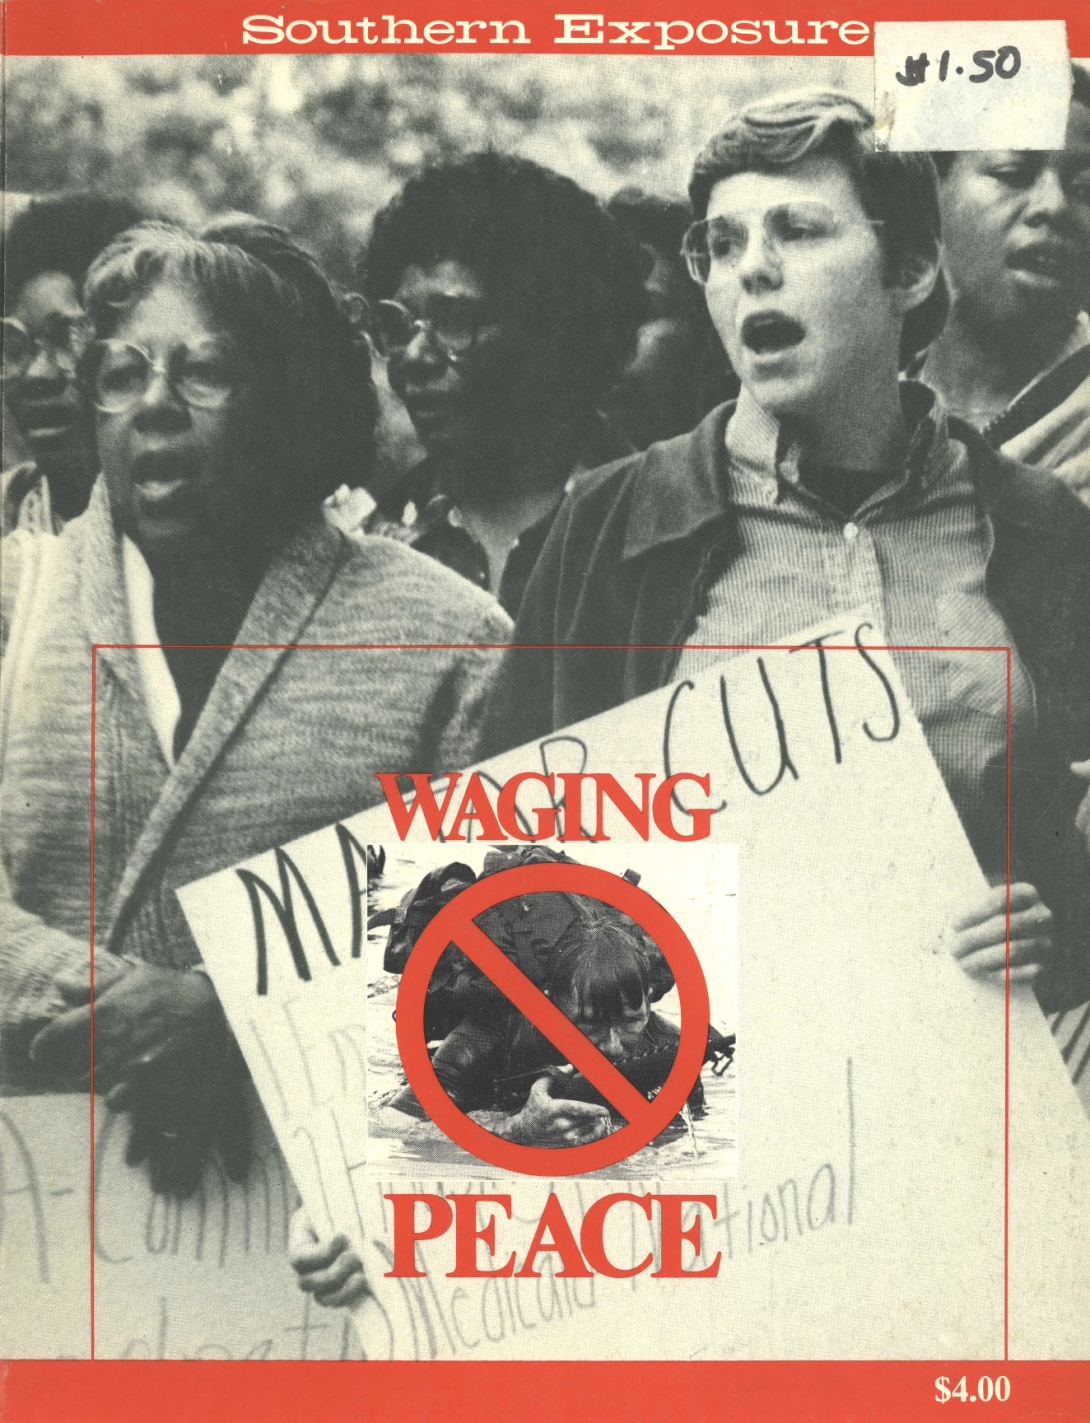 women marching and holding posters